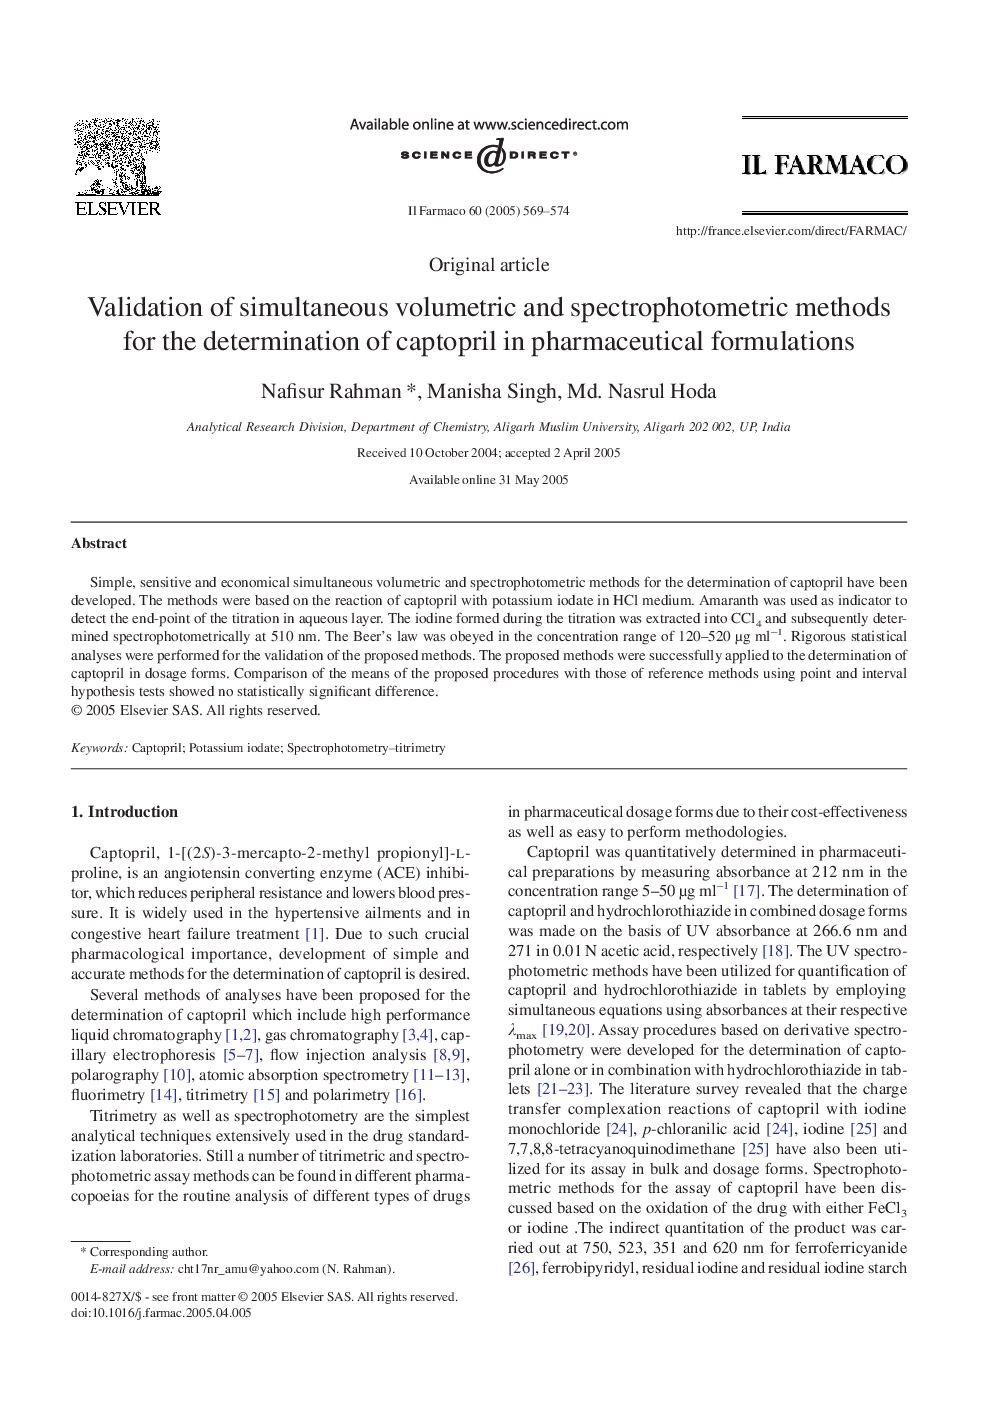 Validation of simultaneous volumetric and spectrophotometric methods for the determination of captopril in pharmaceutical formulations